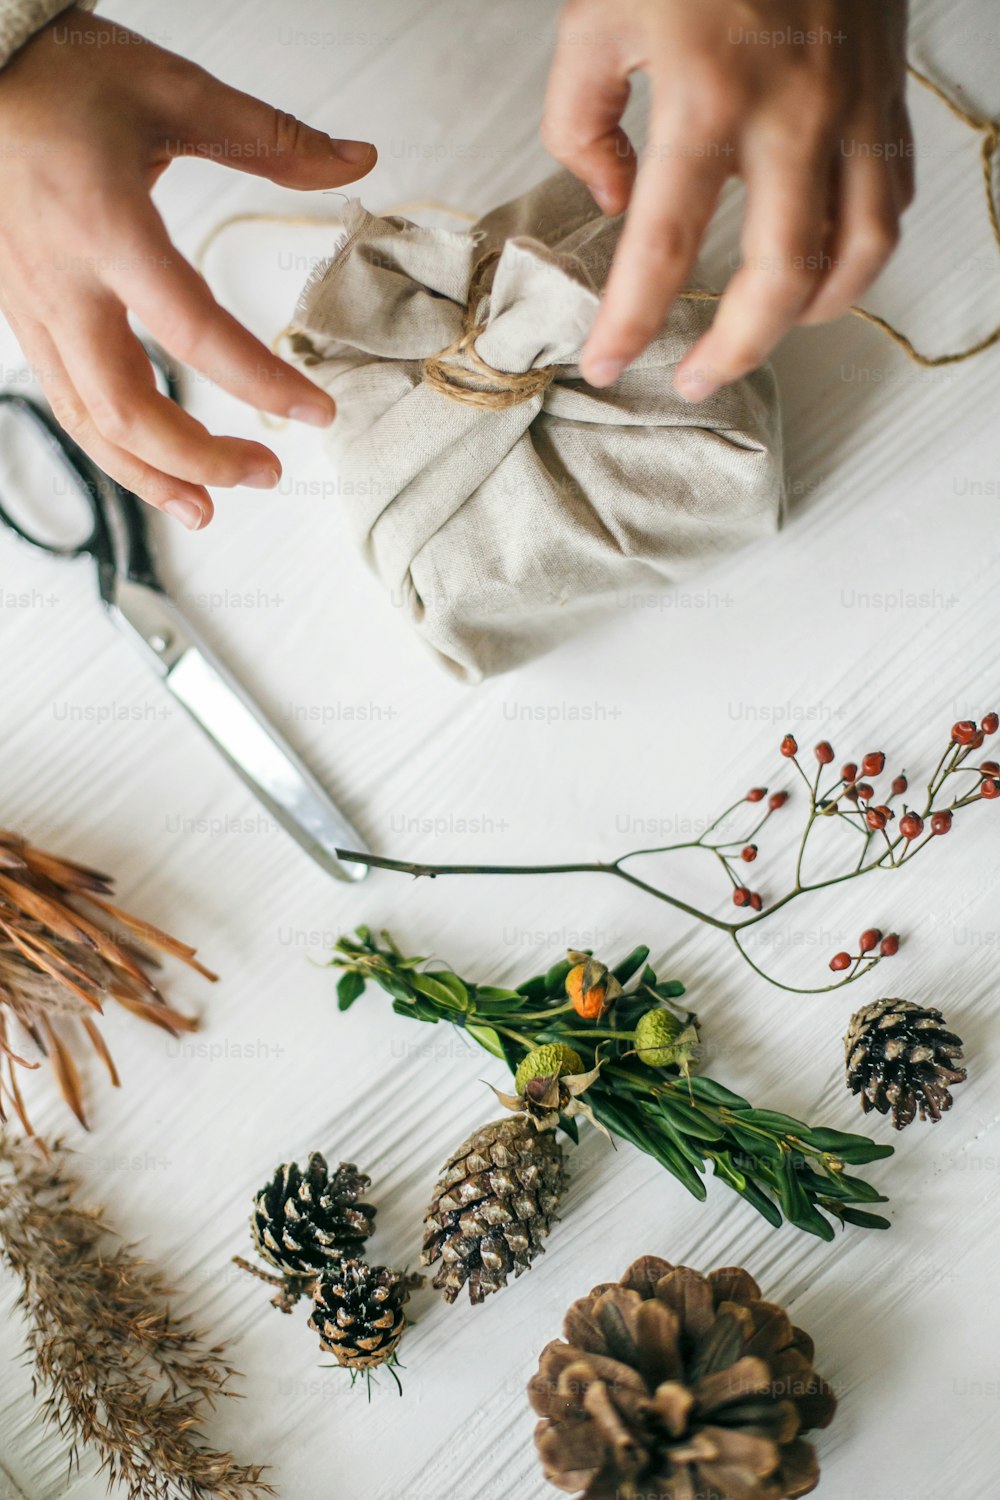 Hands wrapping stylish christmas gift in linen fabric on white rustic table with fir, pine cones, scissors, twine. Female preparing plastic free christmas present, zero waste holidays.